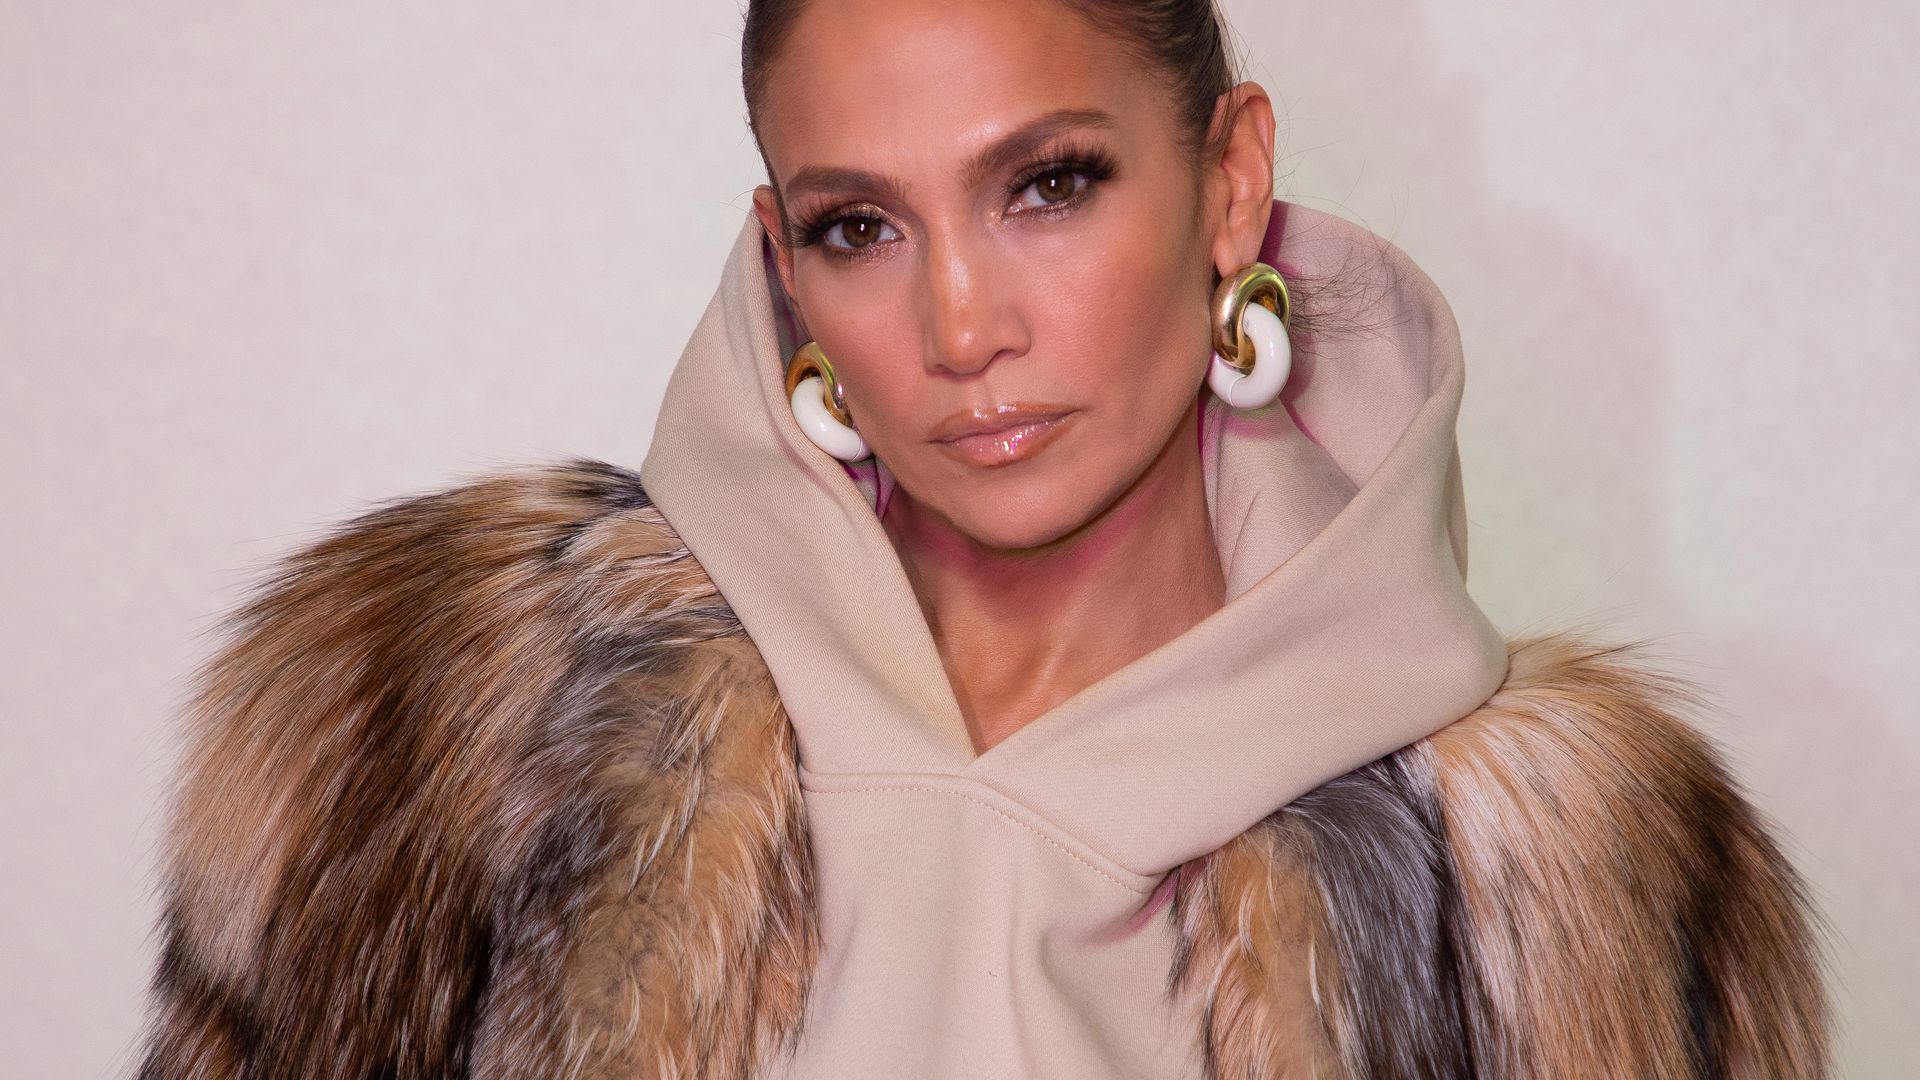 jennifer Lopez with hair up in fur coat